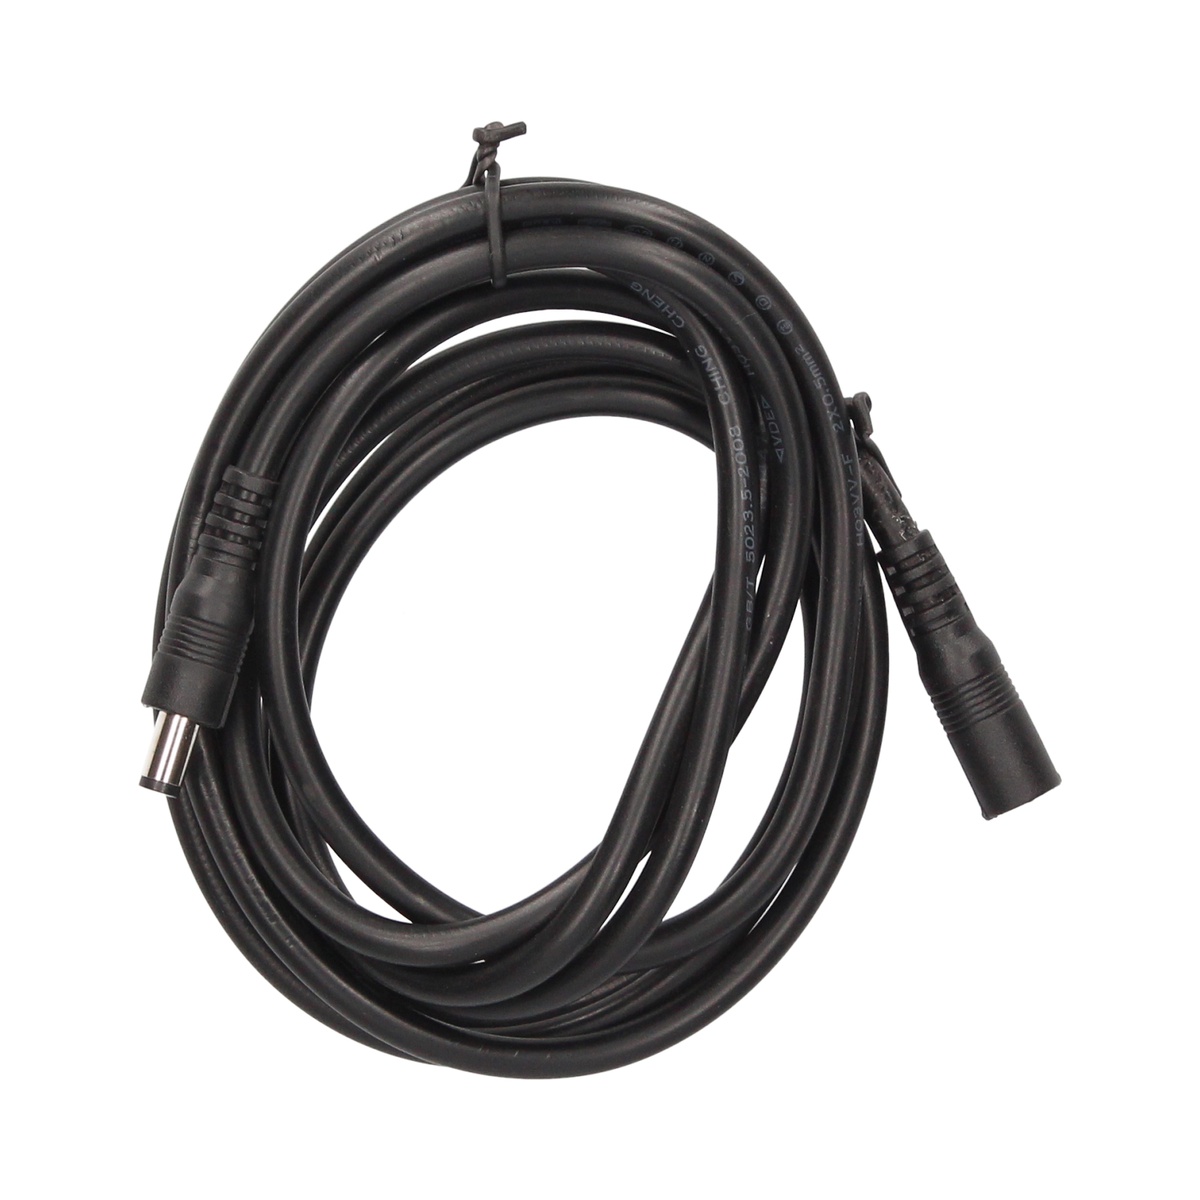 Cable (2x1.5mm) 2M para proyector solar ref. 202615003